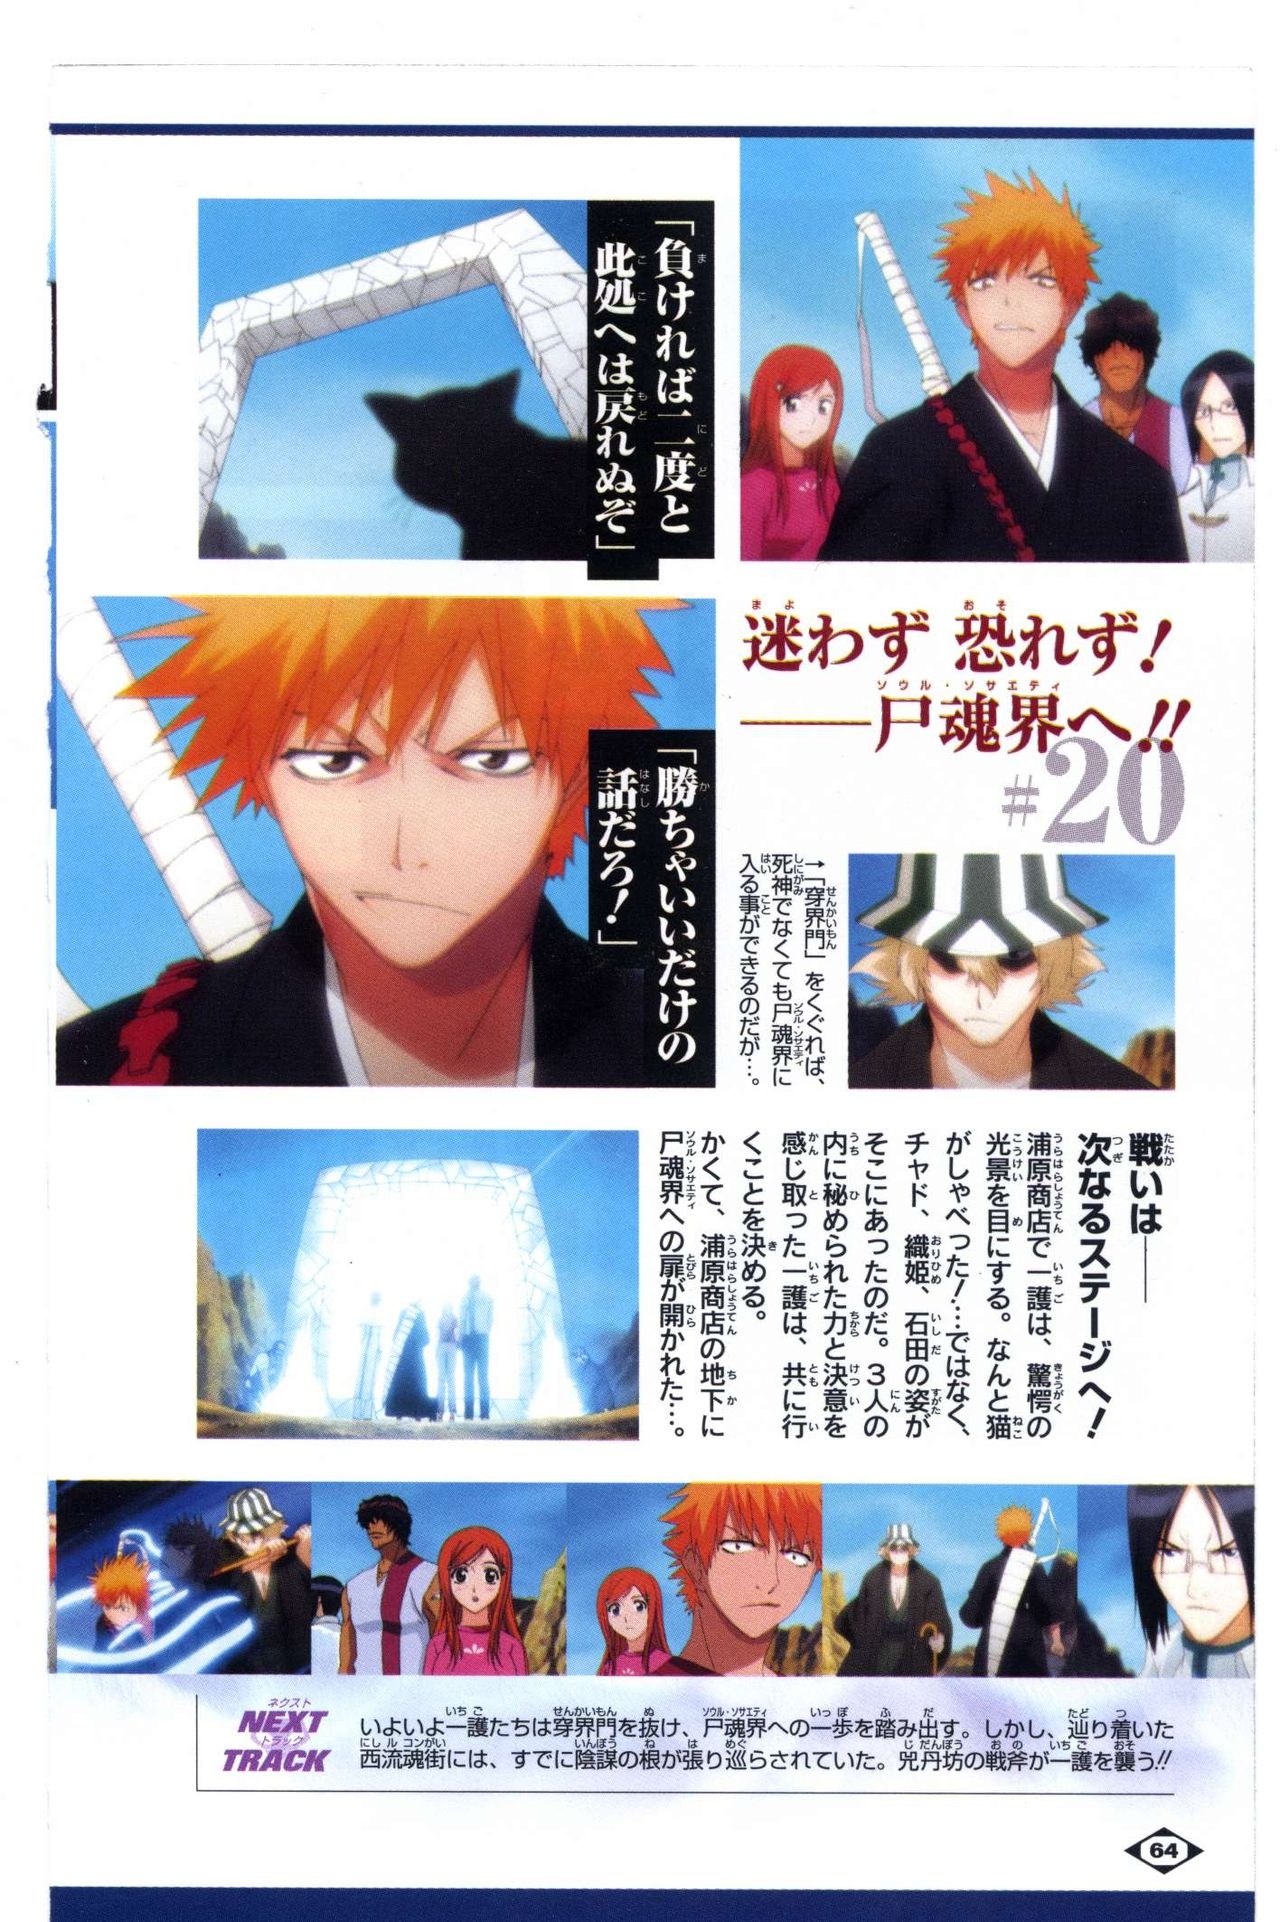 Bleach: Official Animation Book VIBEs 64